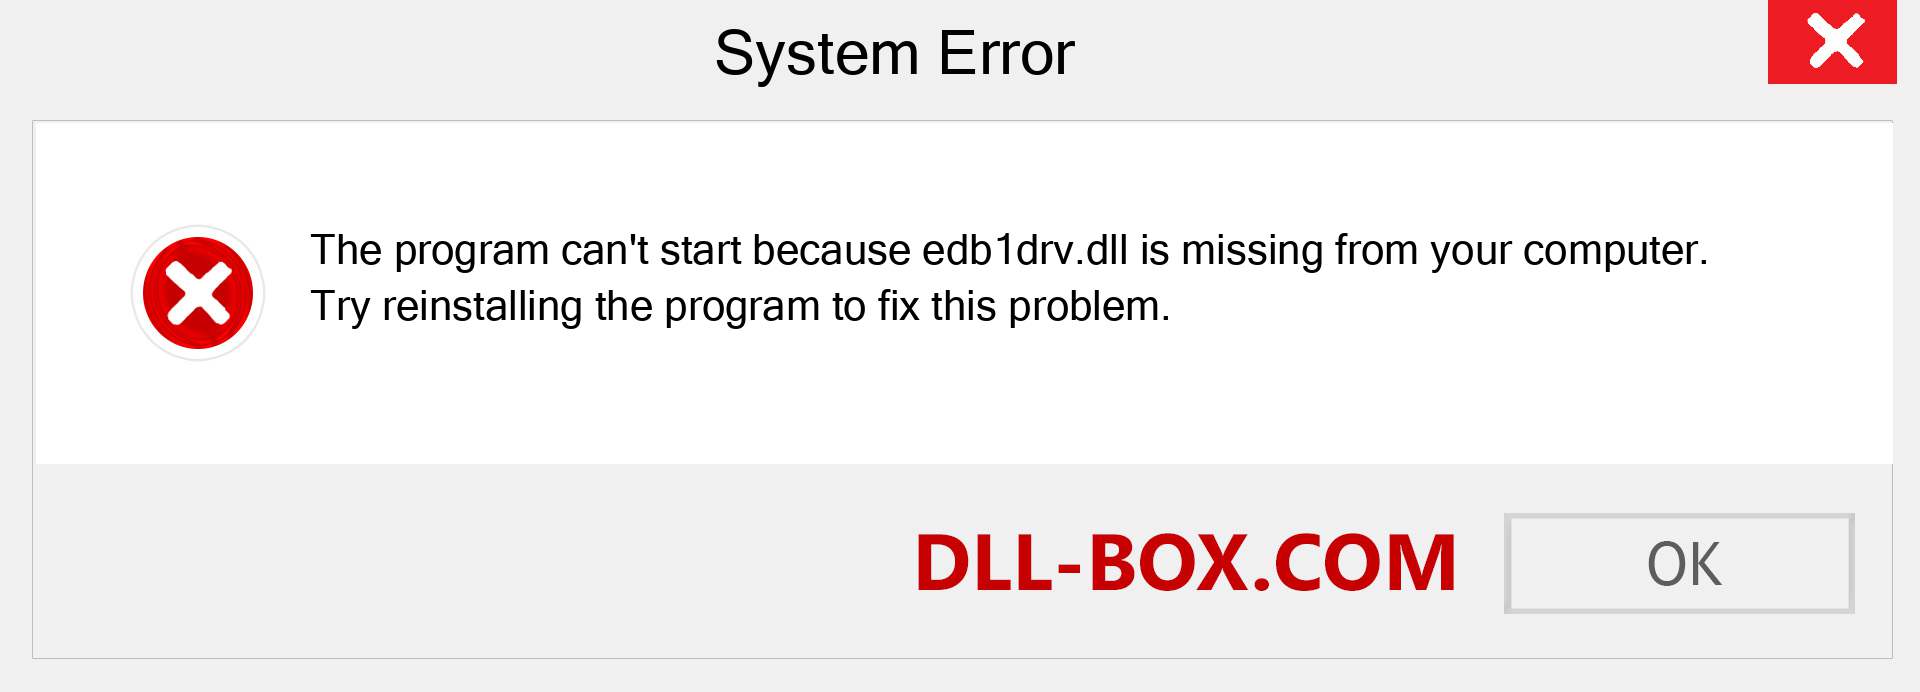  edb1drv.dll file is missing?. Download for Windows 7, 8, 10 - Fix  edb1drv dll Missing Error on Windows, photos, images